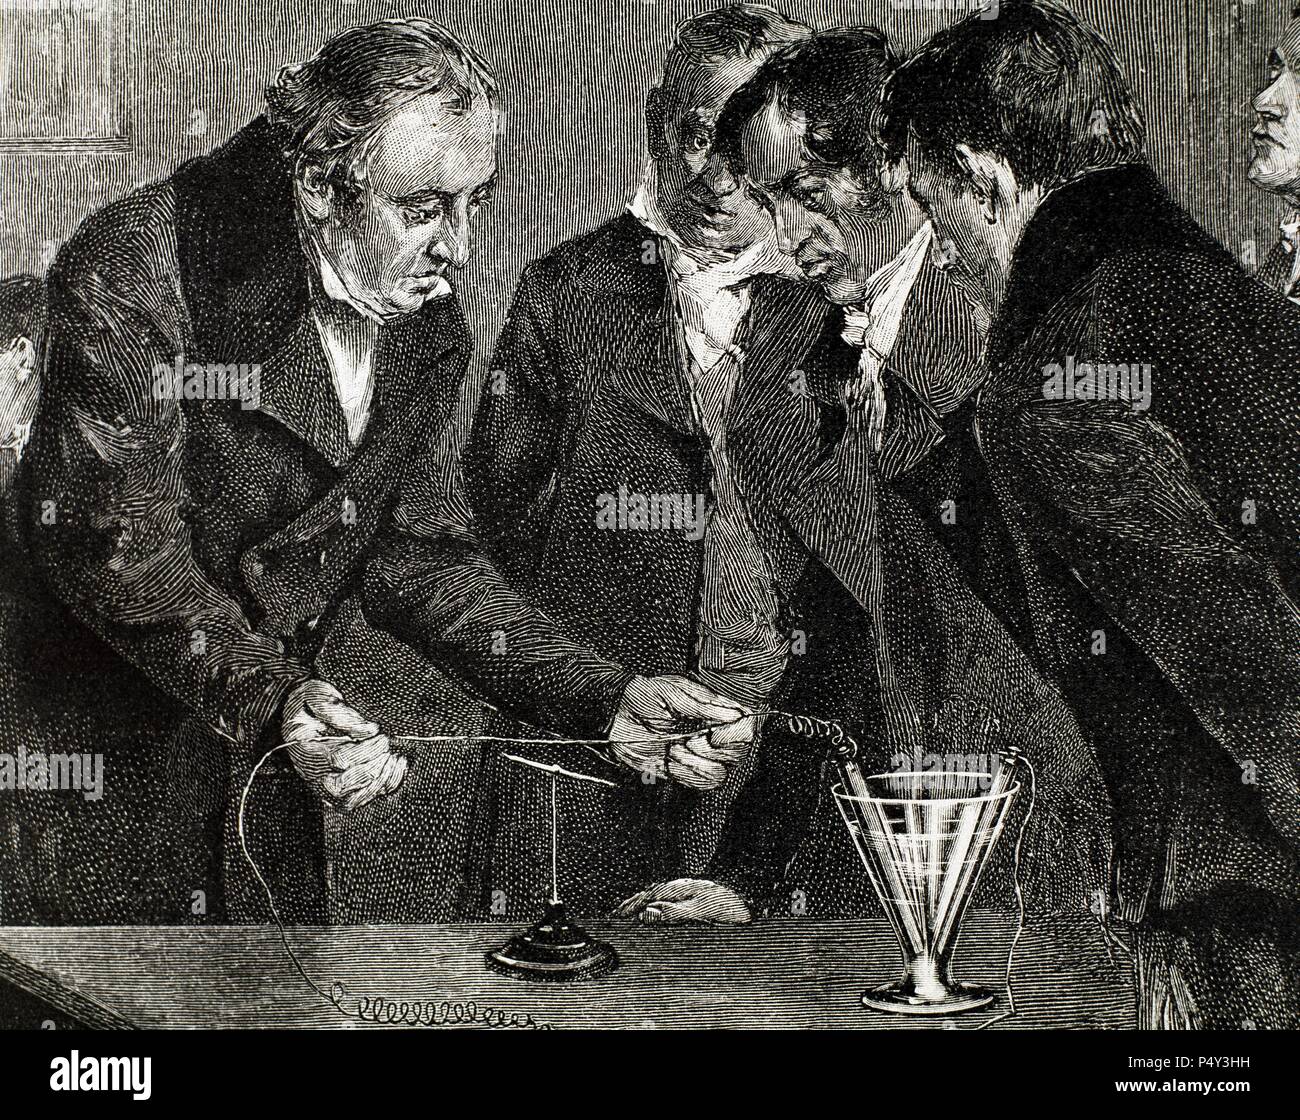 Oersted, Hans Christian (Copenhagen Rudkobing ,1777-1851). Danish physicist   and chemist. Oersted discovers electromagnetism. Engraving. Stock Photo